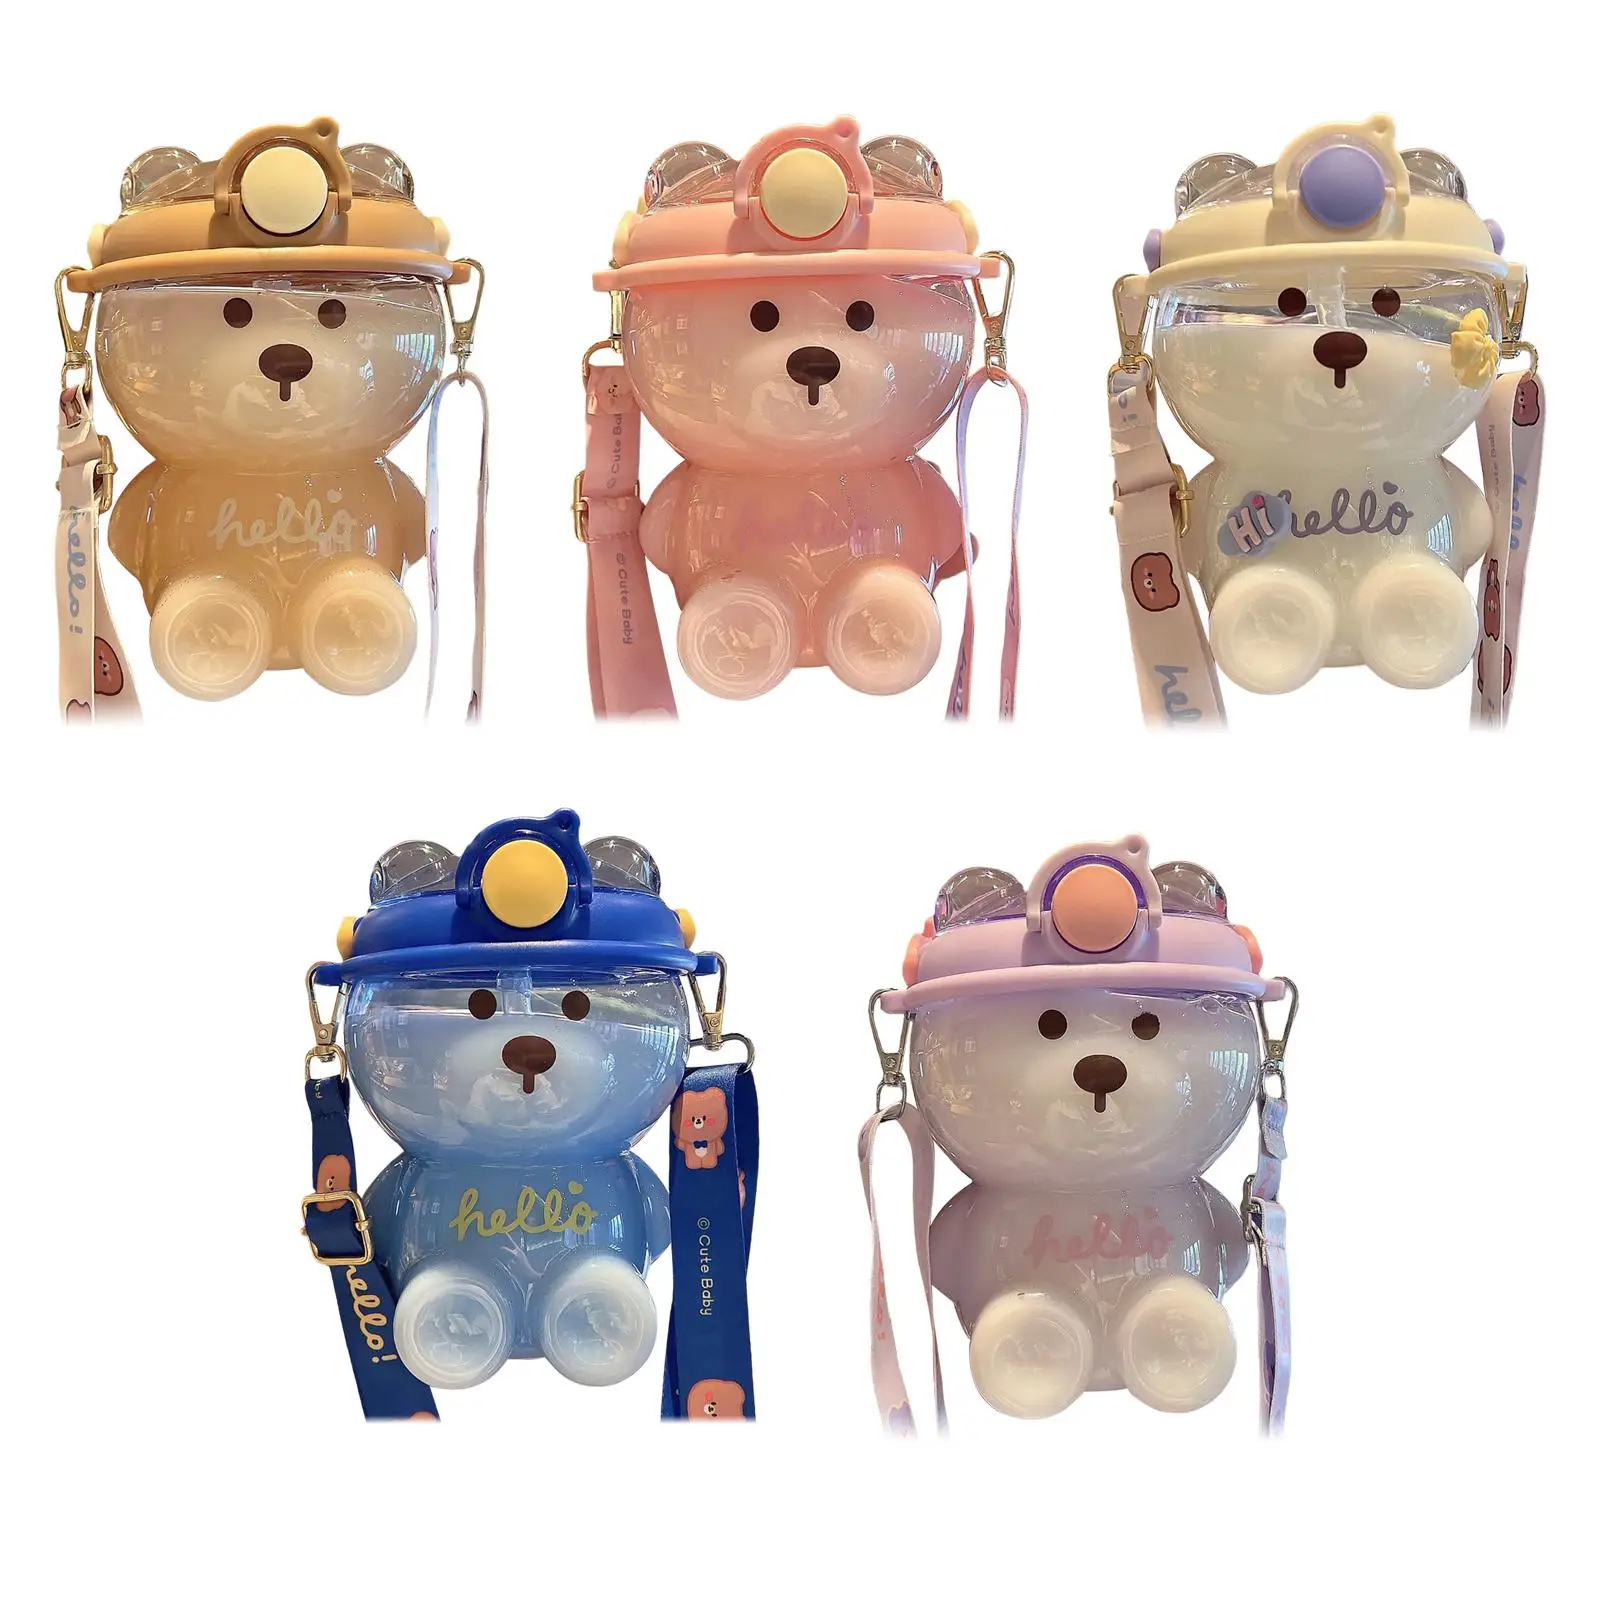 1000ml Kawaii Water Bottle with Straw with Handle Large Capacity Bear Shape Portable Mug for Travel Sport Office Girls Children